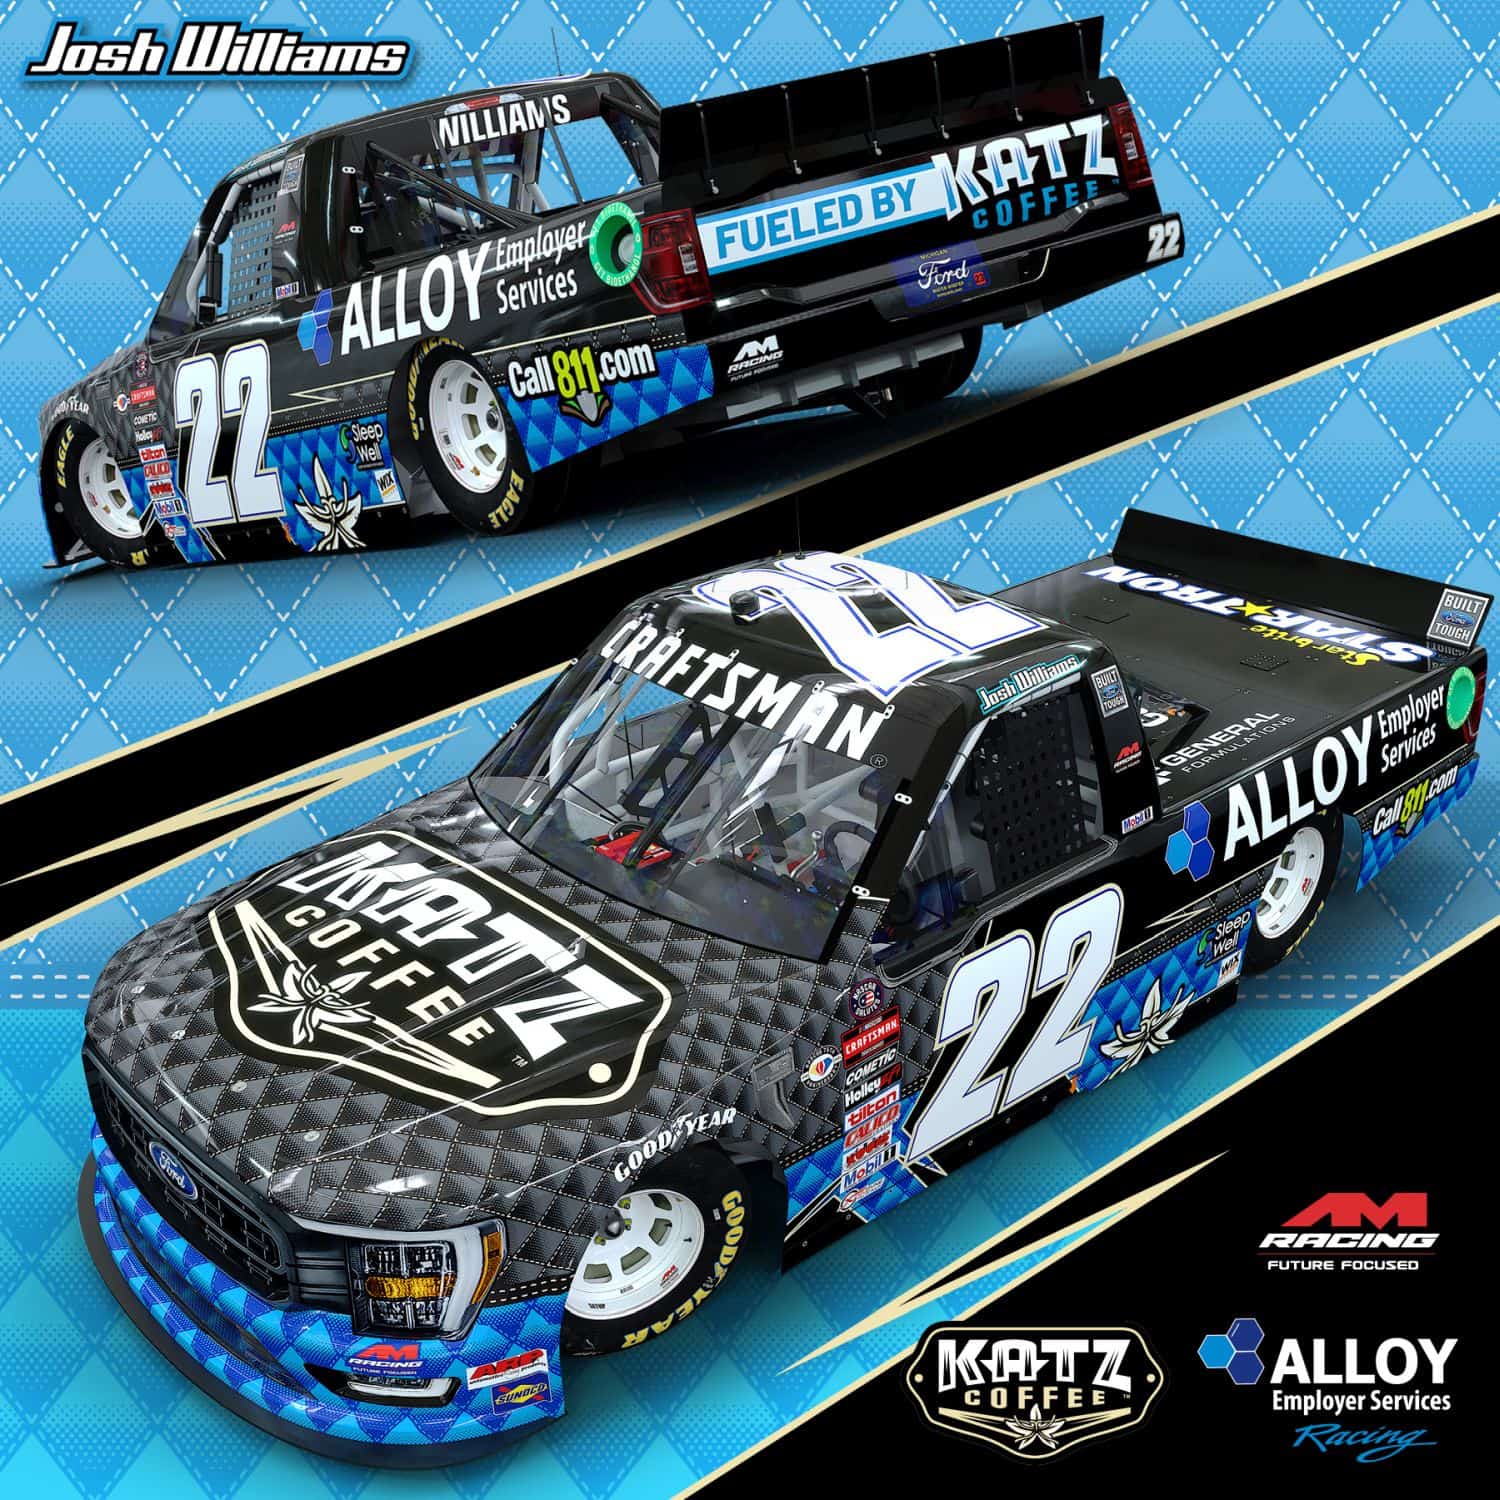 Read more about the article Katz Coffee and Alloy Employer Services Join Forces to Co-Sponsor Josh Williams with AM Racing at North Wilkesboro Speedway